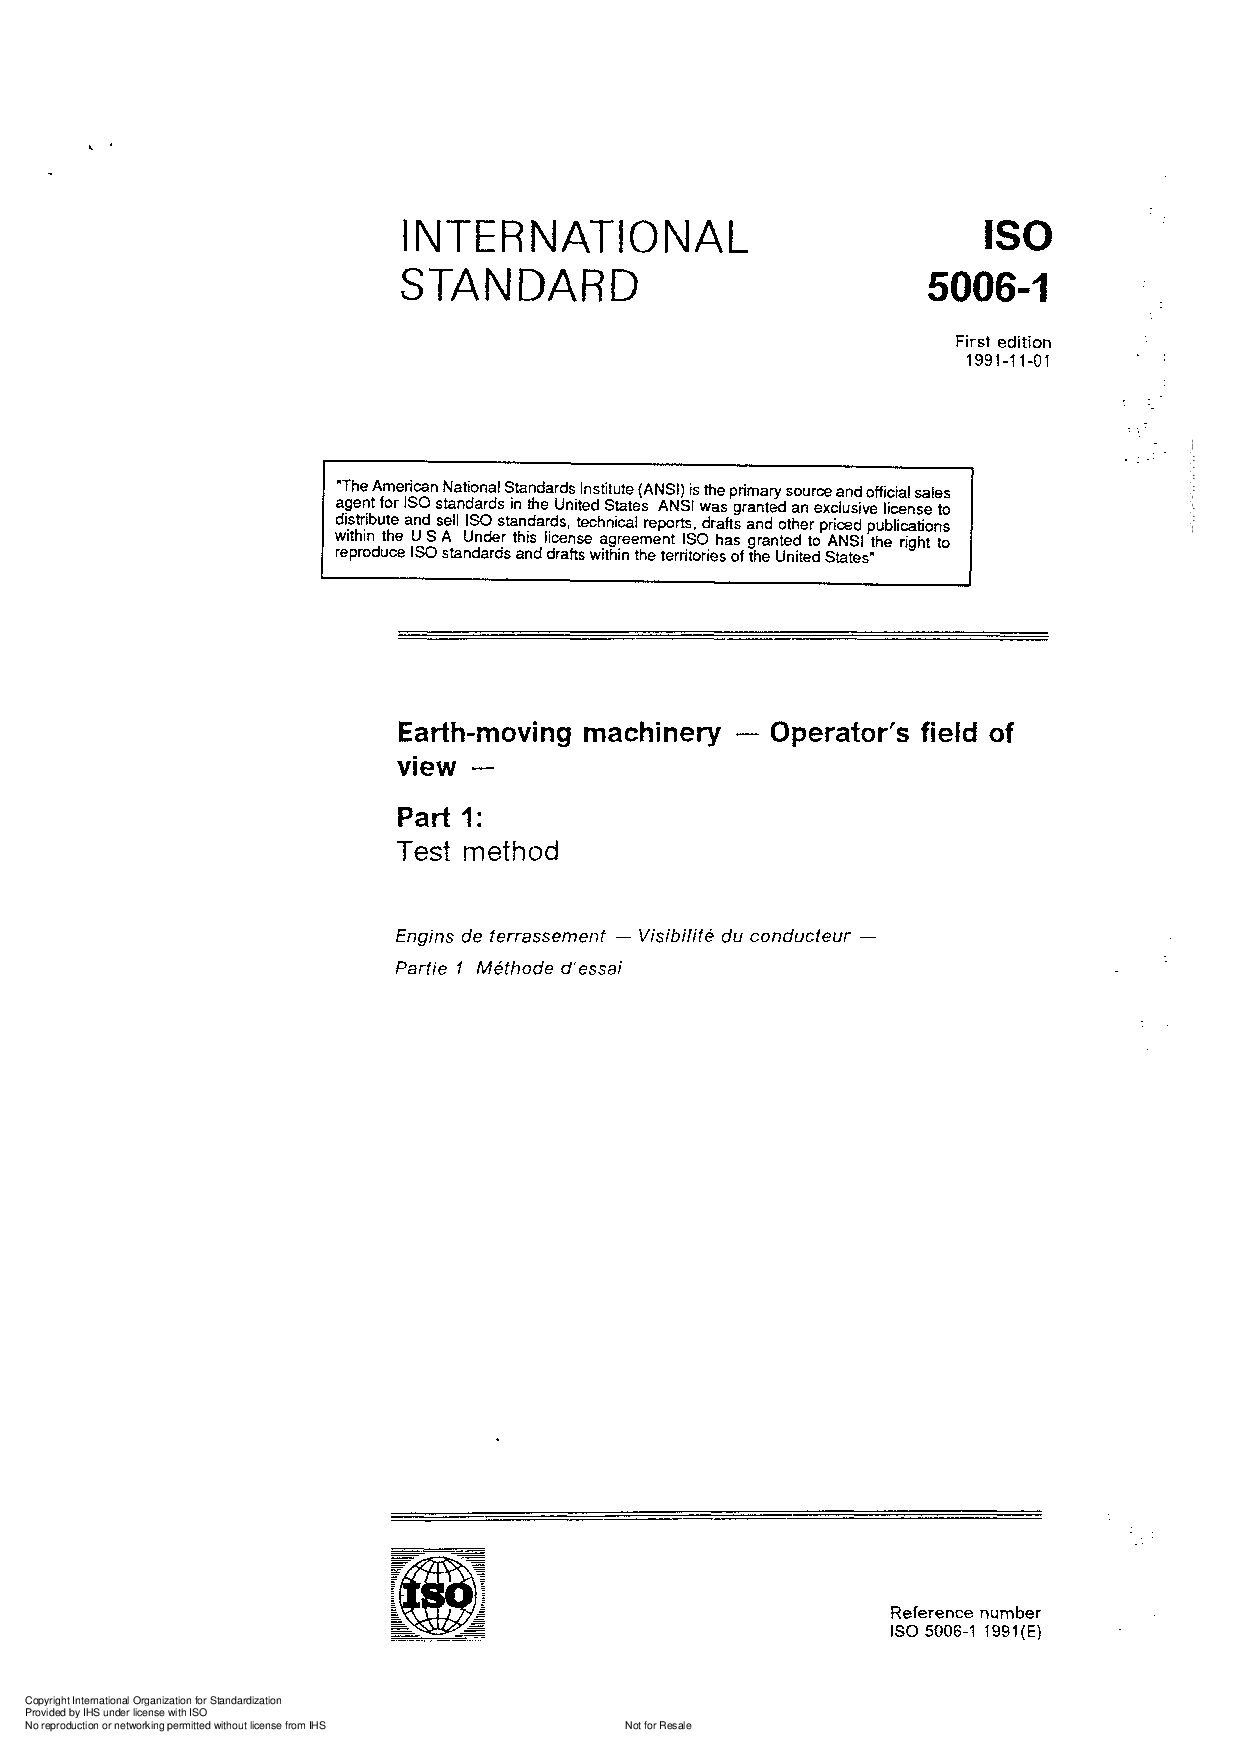 ISO 5006-1:1991